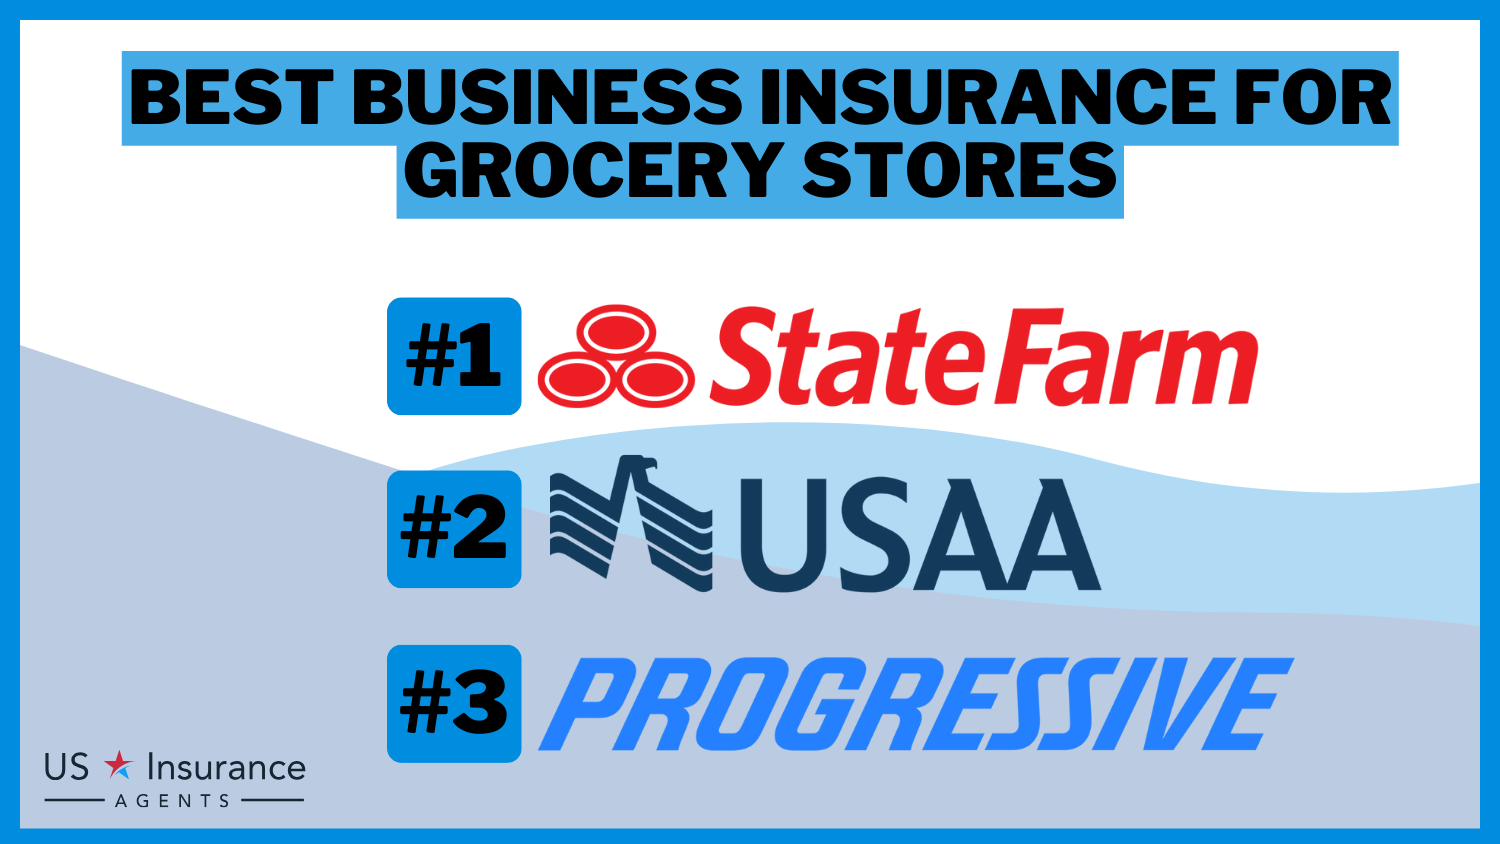 Best Business Insurance for Grocery Stores: StateFarm, USAA and Progressive.